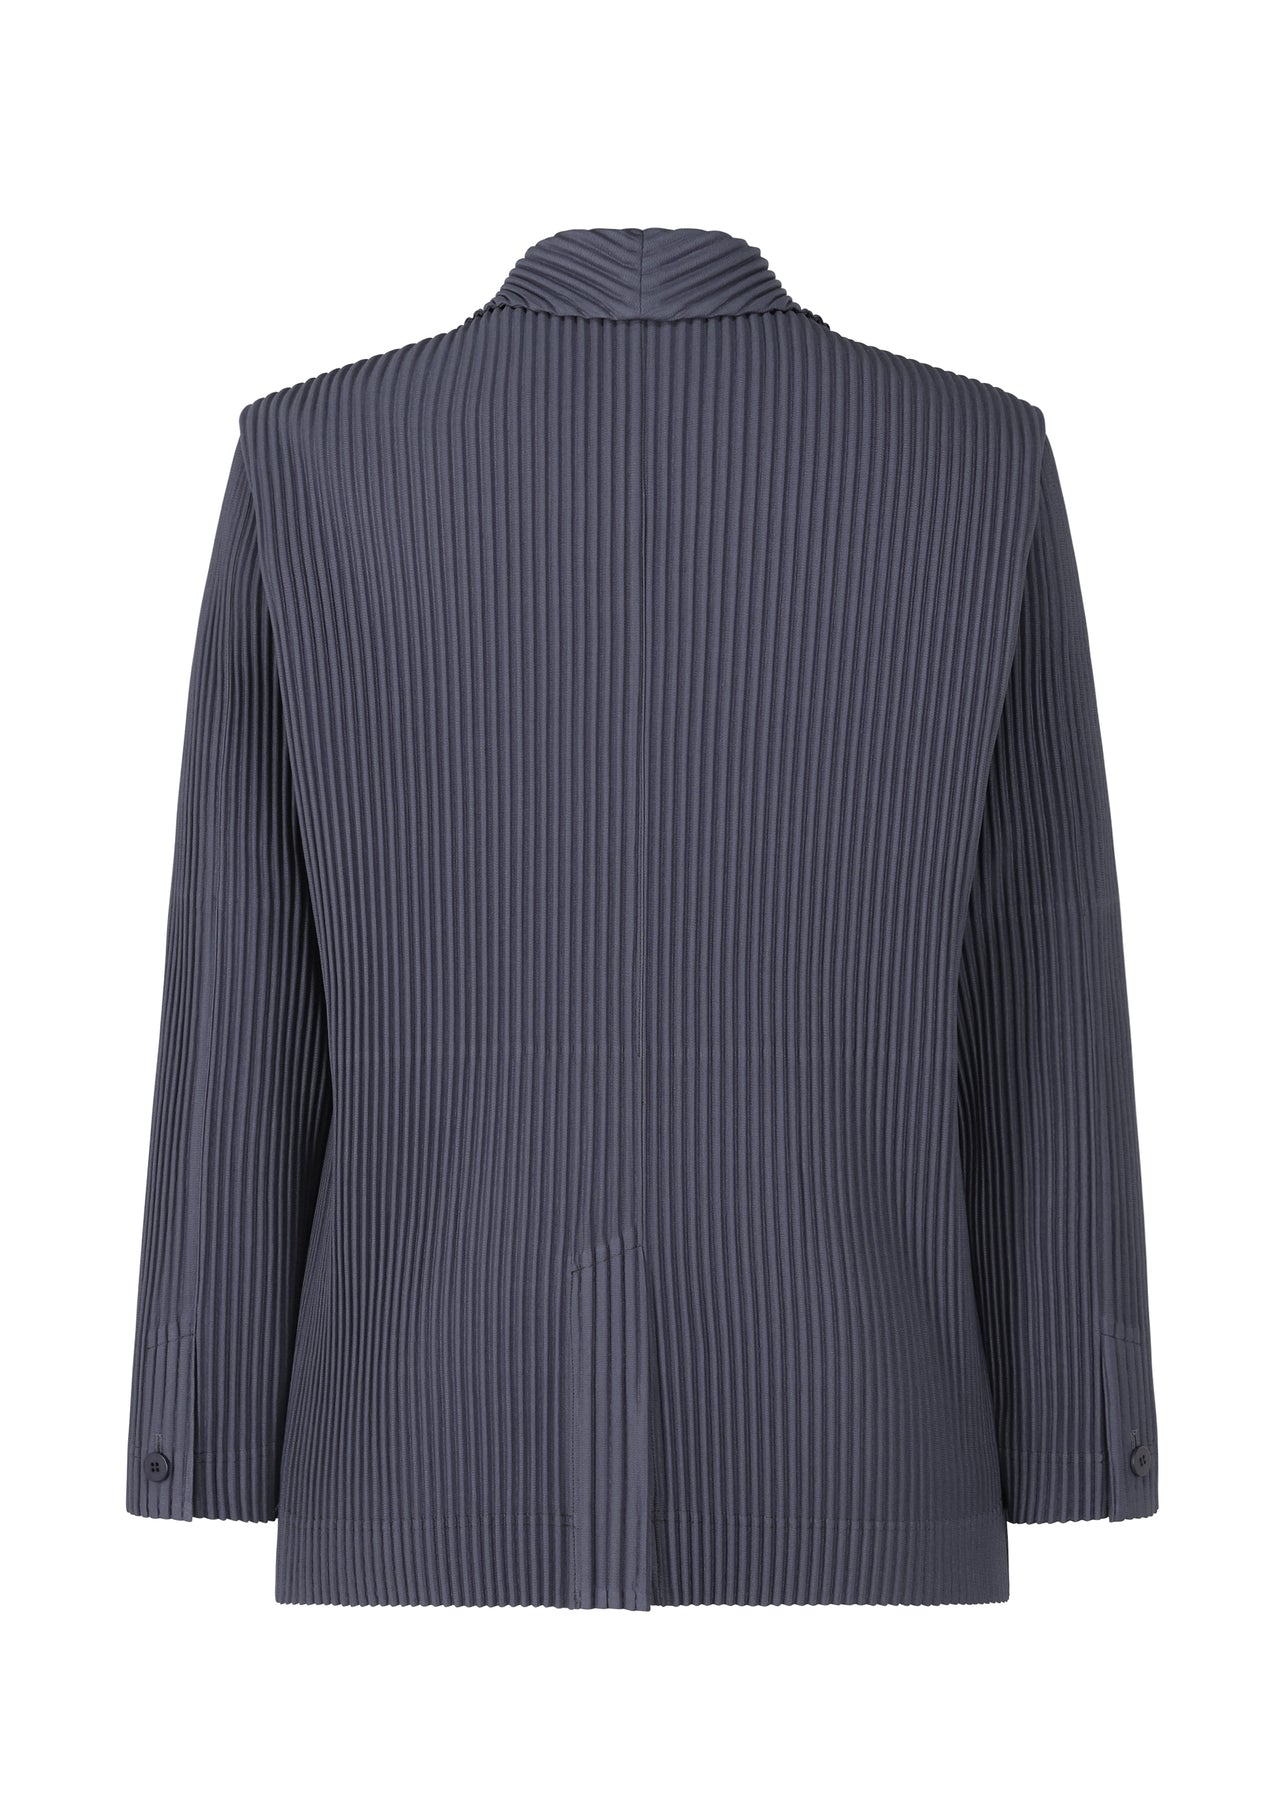 TAILORED PLEATS 2 JACKET | The official ISSEY MIYAKE ONLINE STORE 